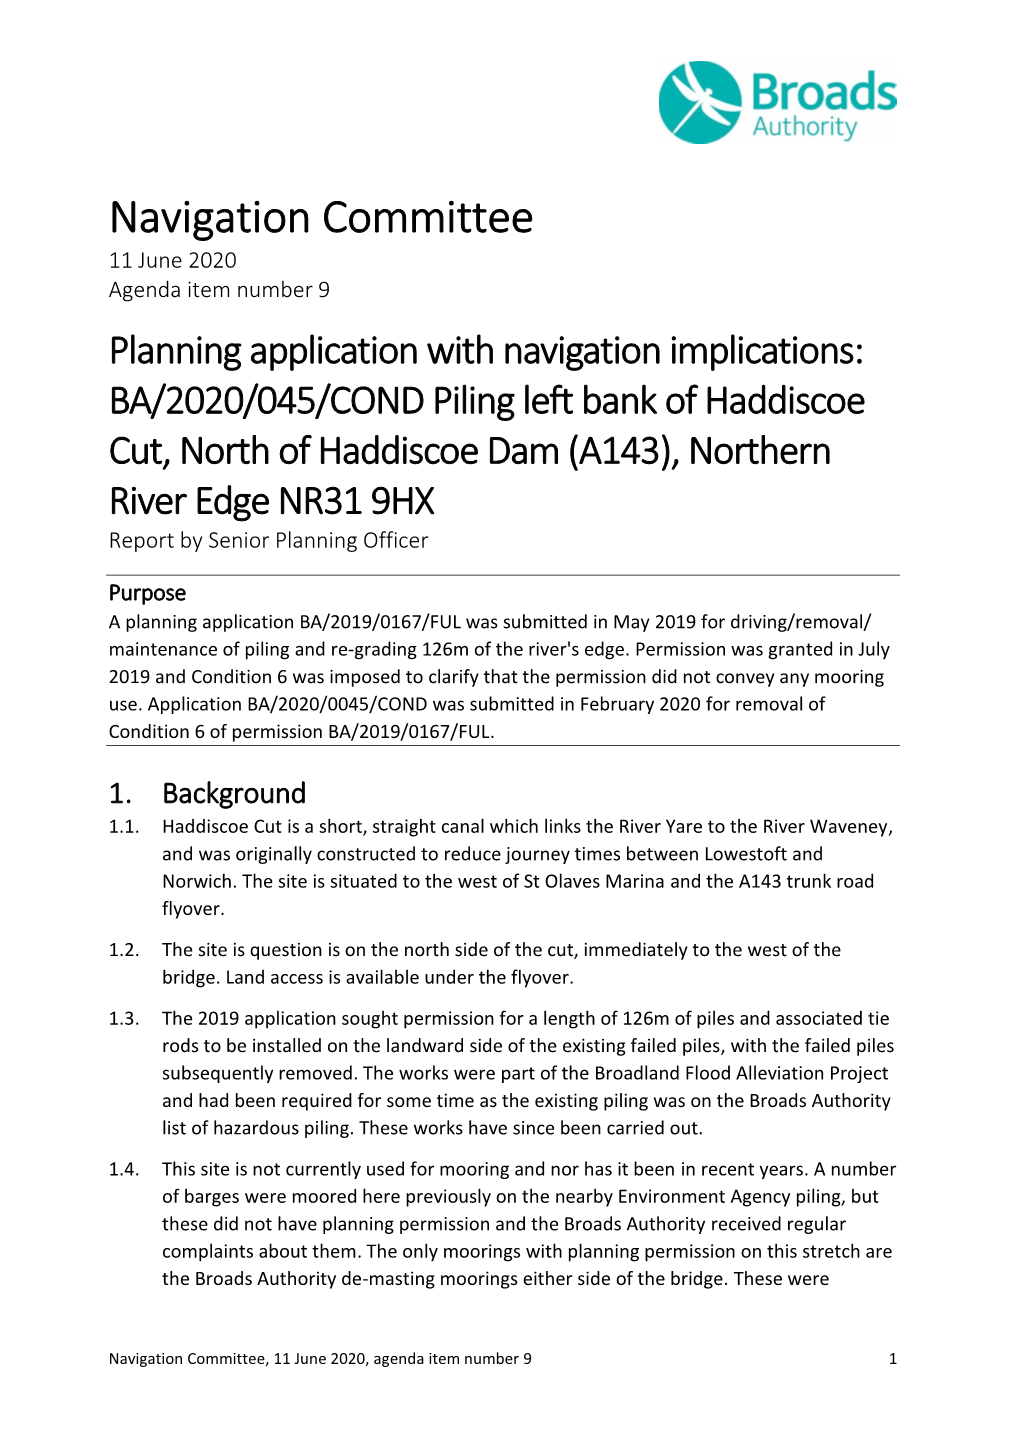 Planning Application with Navigation Implications: BA/2020/045/COND Piling Left Bank of Haddiscoe Cut, North of Haddiscoe Dam (A